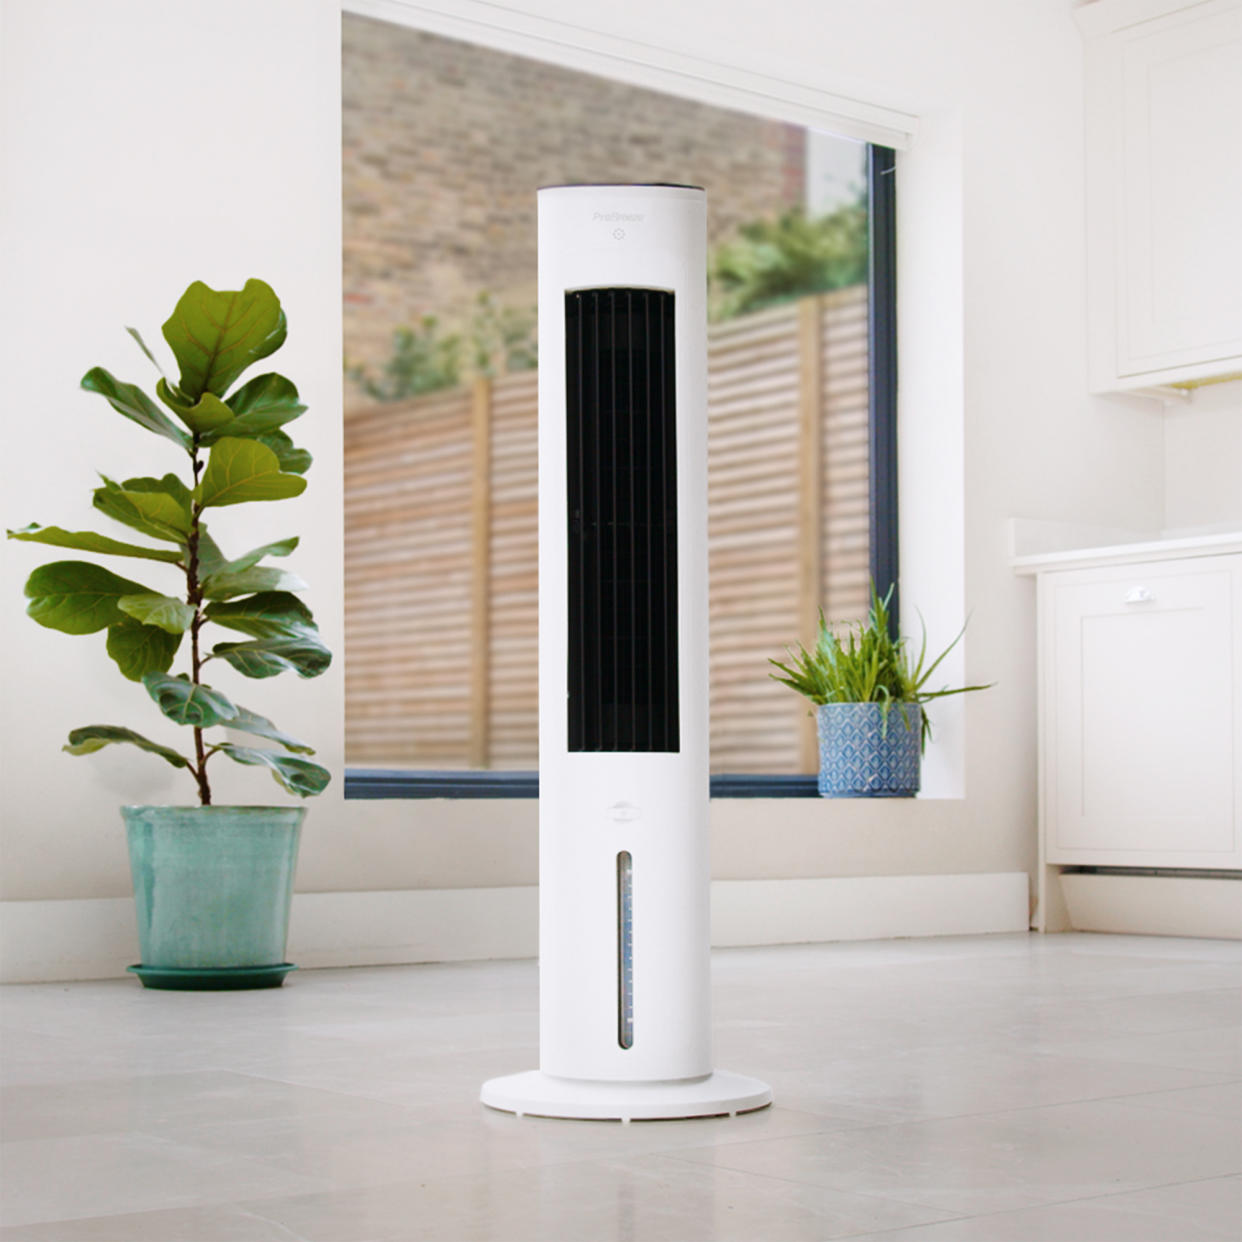  Pro Breeze air cooler and portable tower fan in living room. 